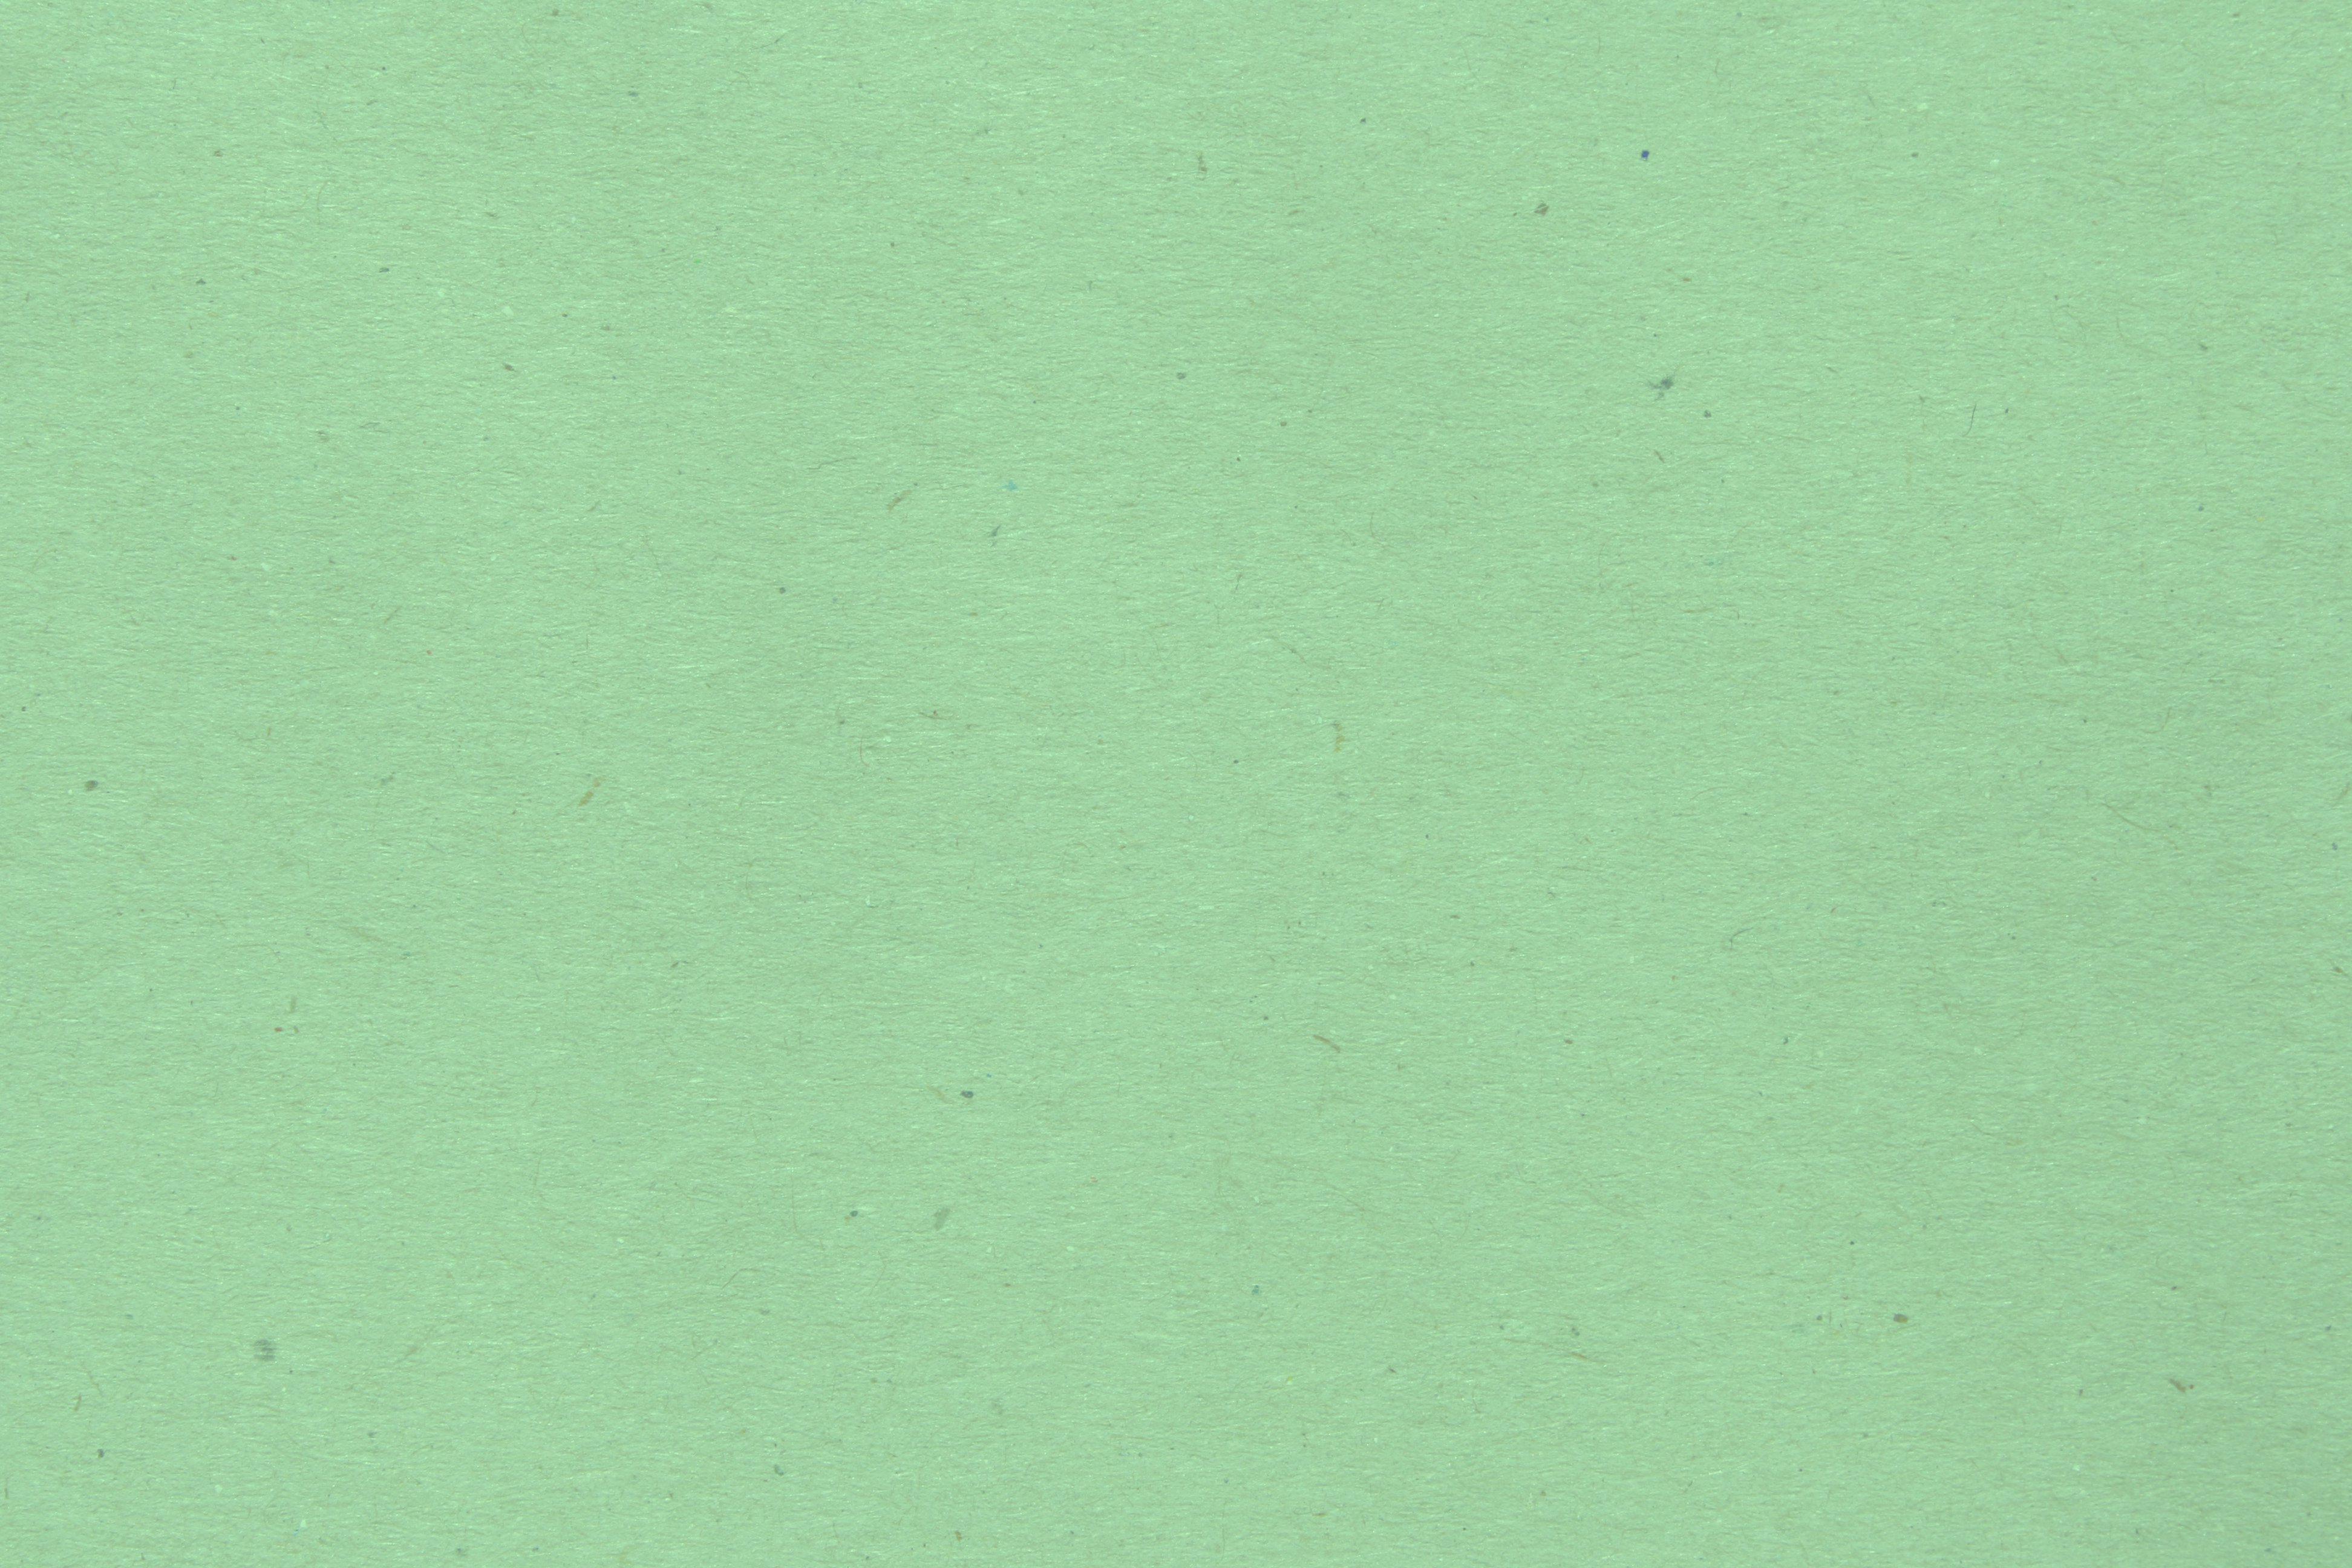  Mint Green  Paper Texture Picture Free Photograph 